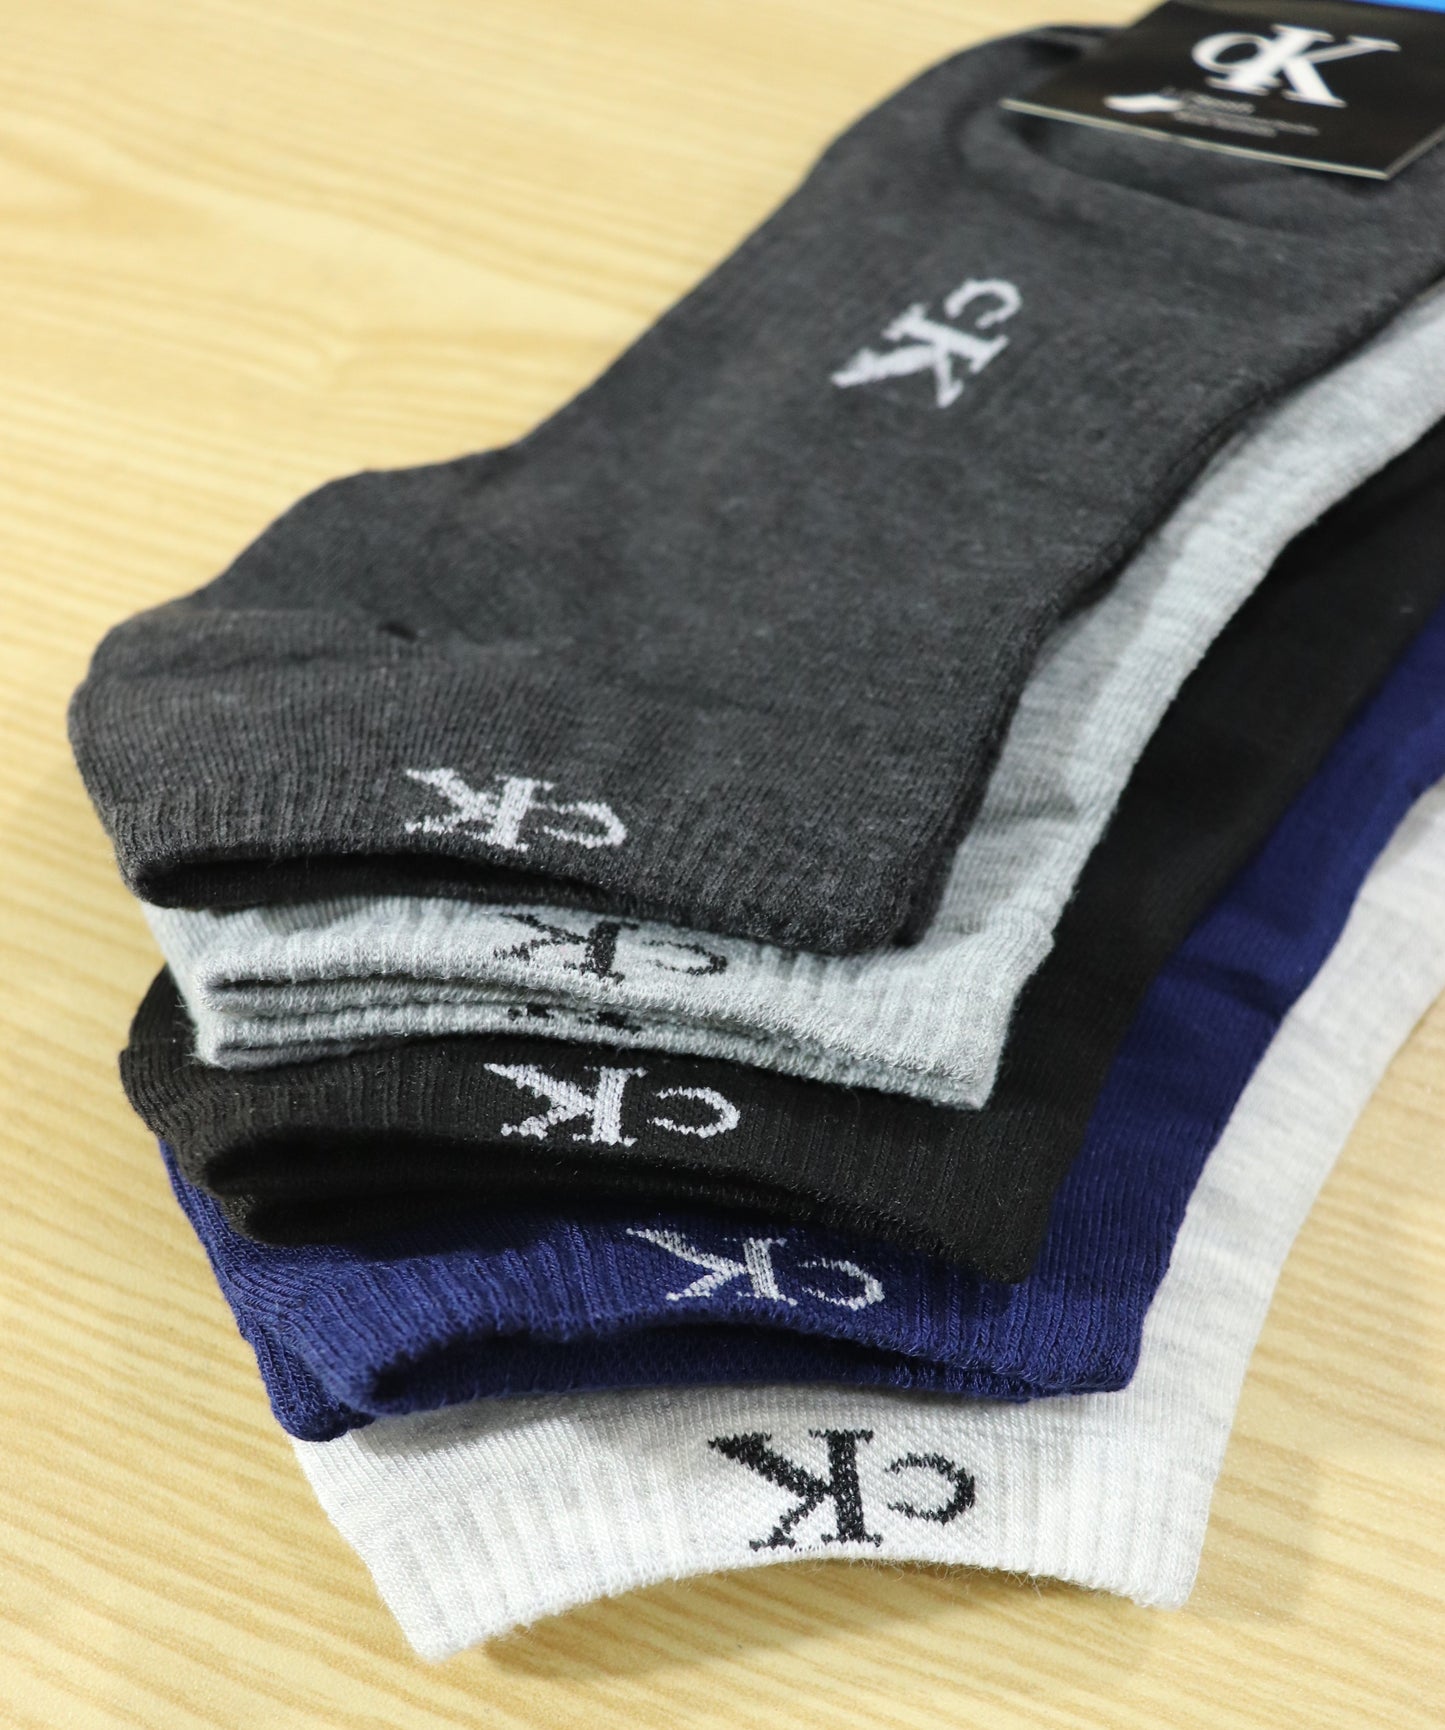 SKS-A2-BUNDLE OFFER 4 PACKS OF "PACK OF 5" IMPORTED ANKLE SOCKS (20 PAIRS)